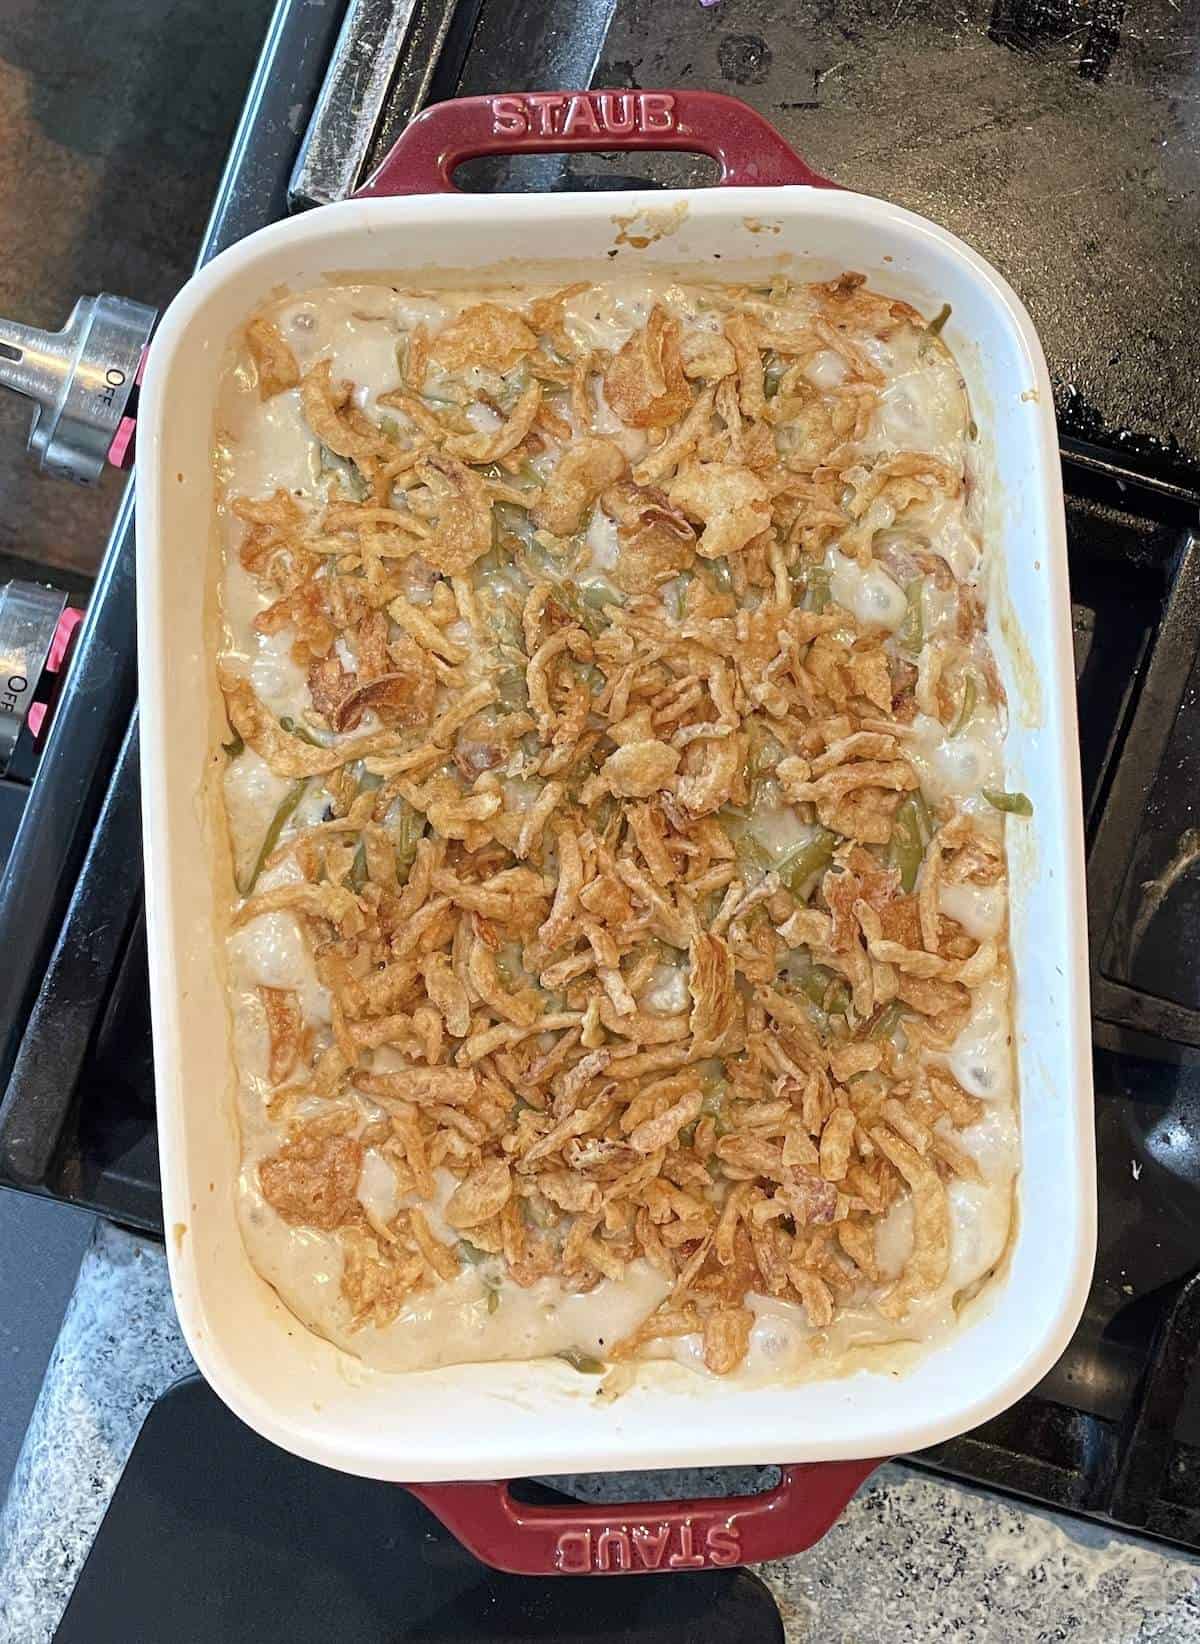 Classic French's green bean casserole covered in crispy onions in a baking dish fresh from the oven.